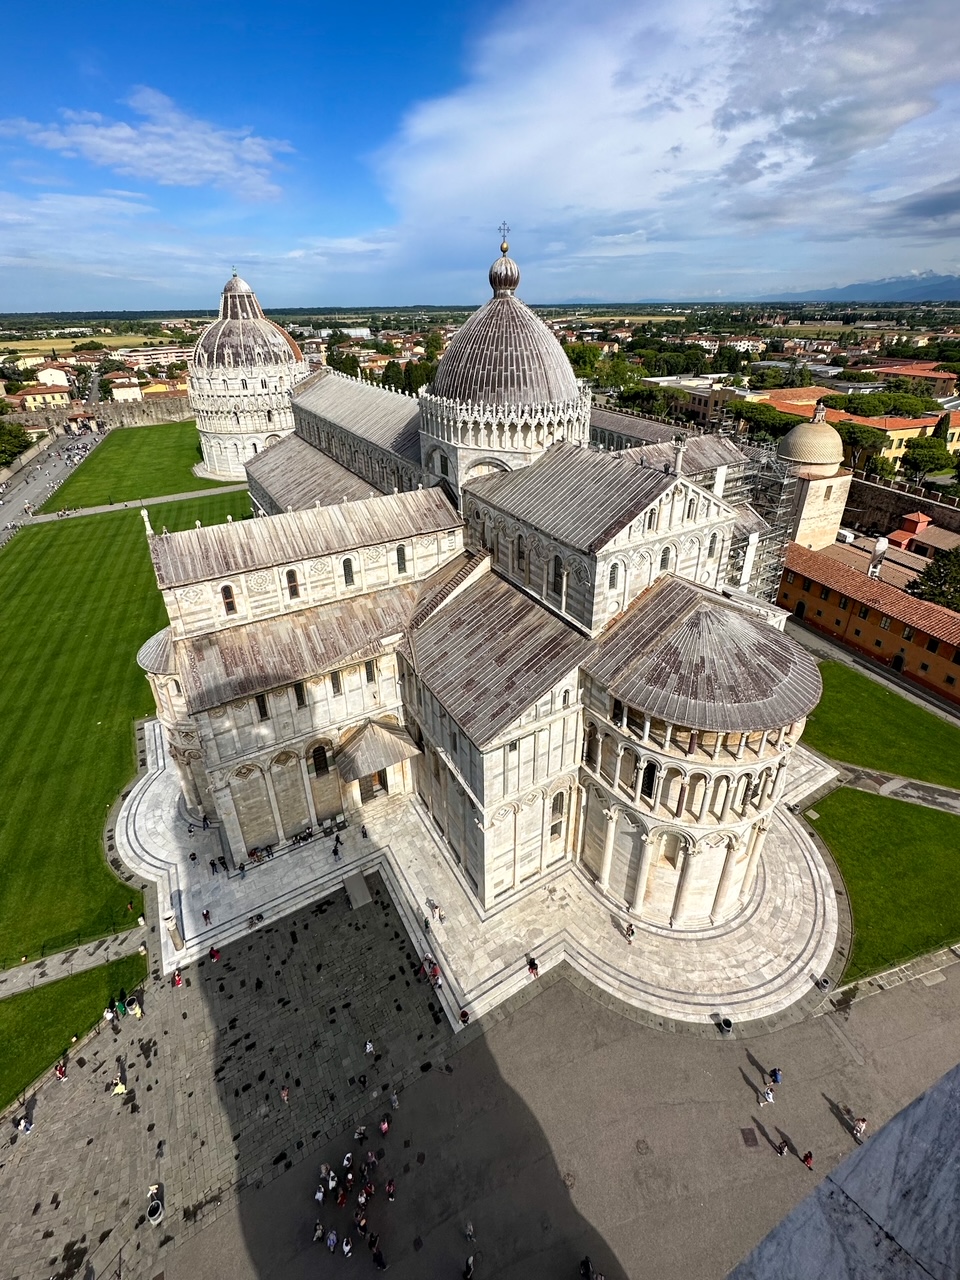 the Piazza del Duomo, a must-visit on your day trip from Florence to Pisa, as seen from the Leaning Tower of Pisa